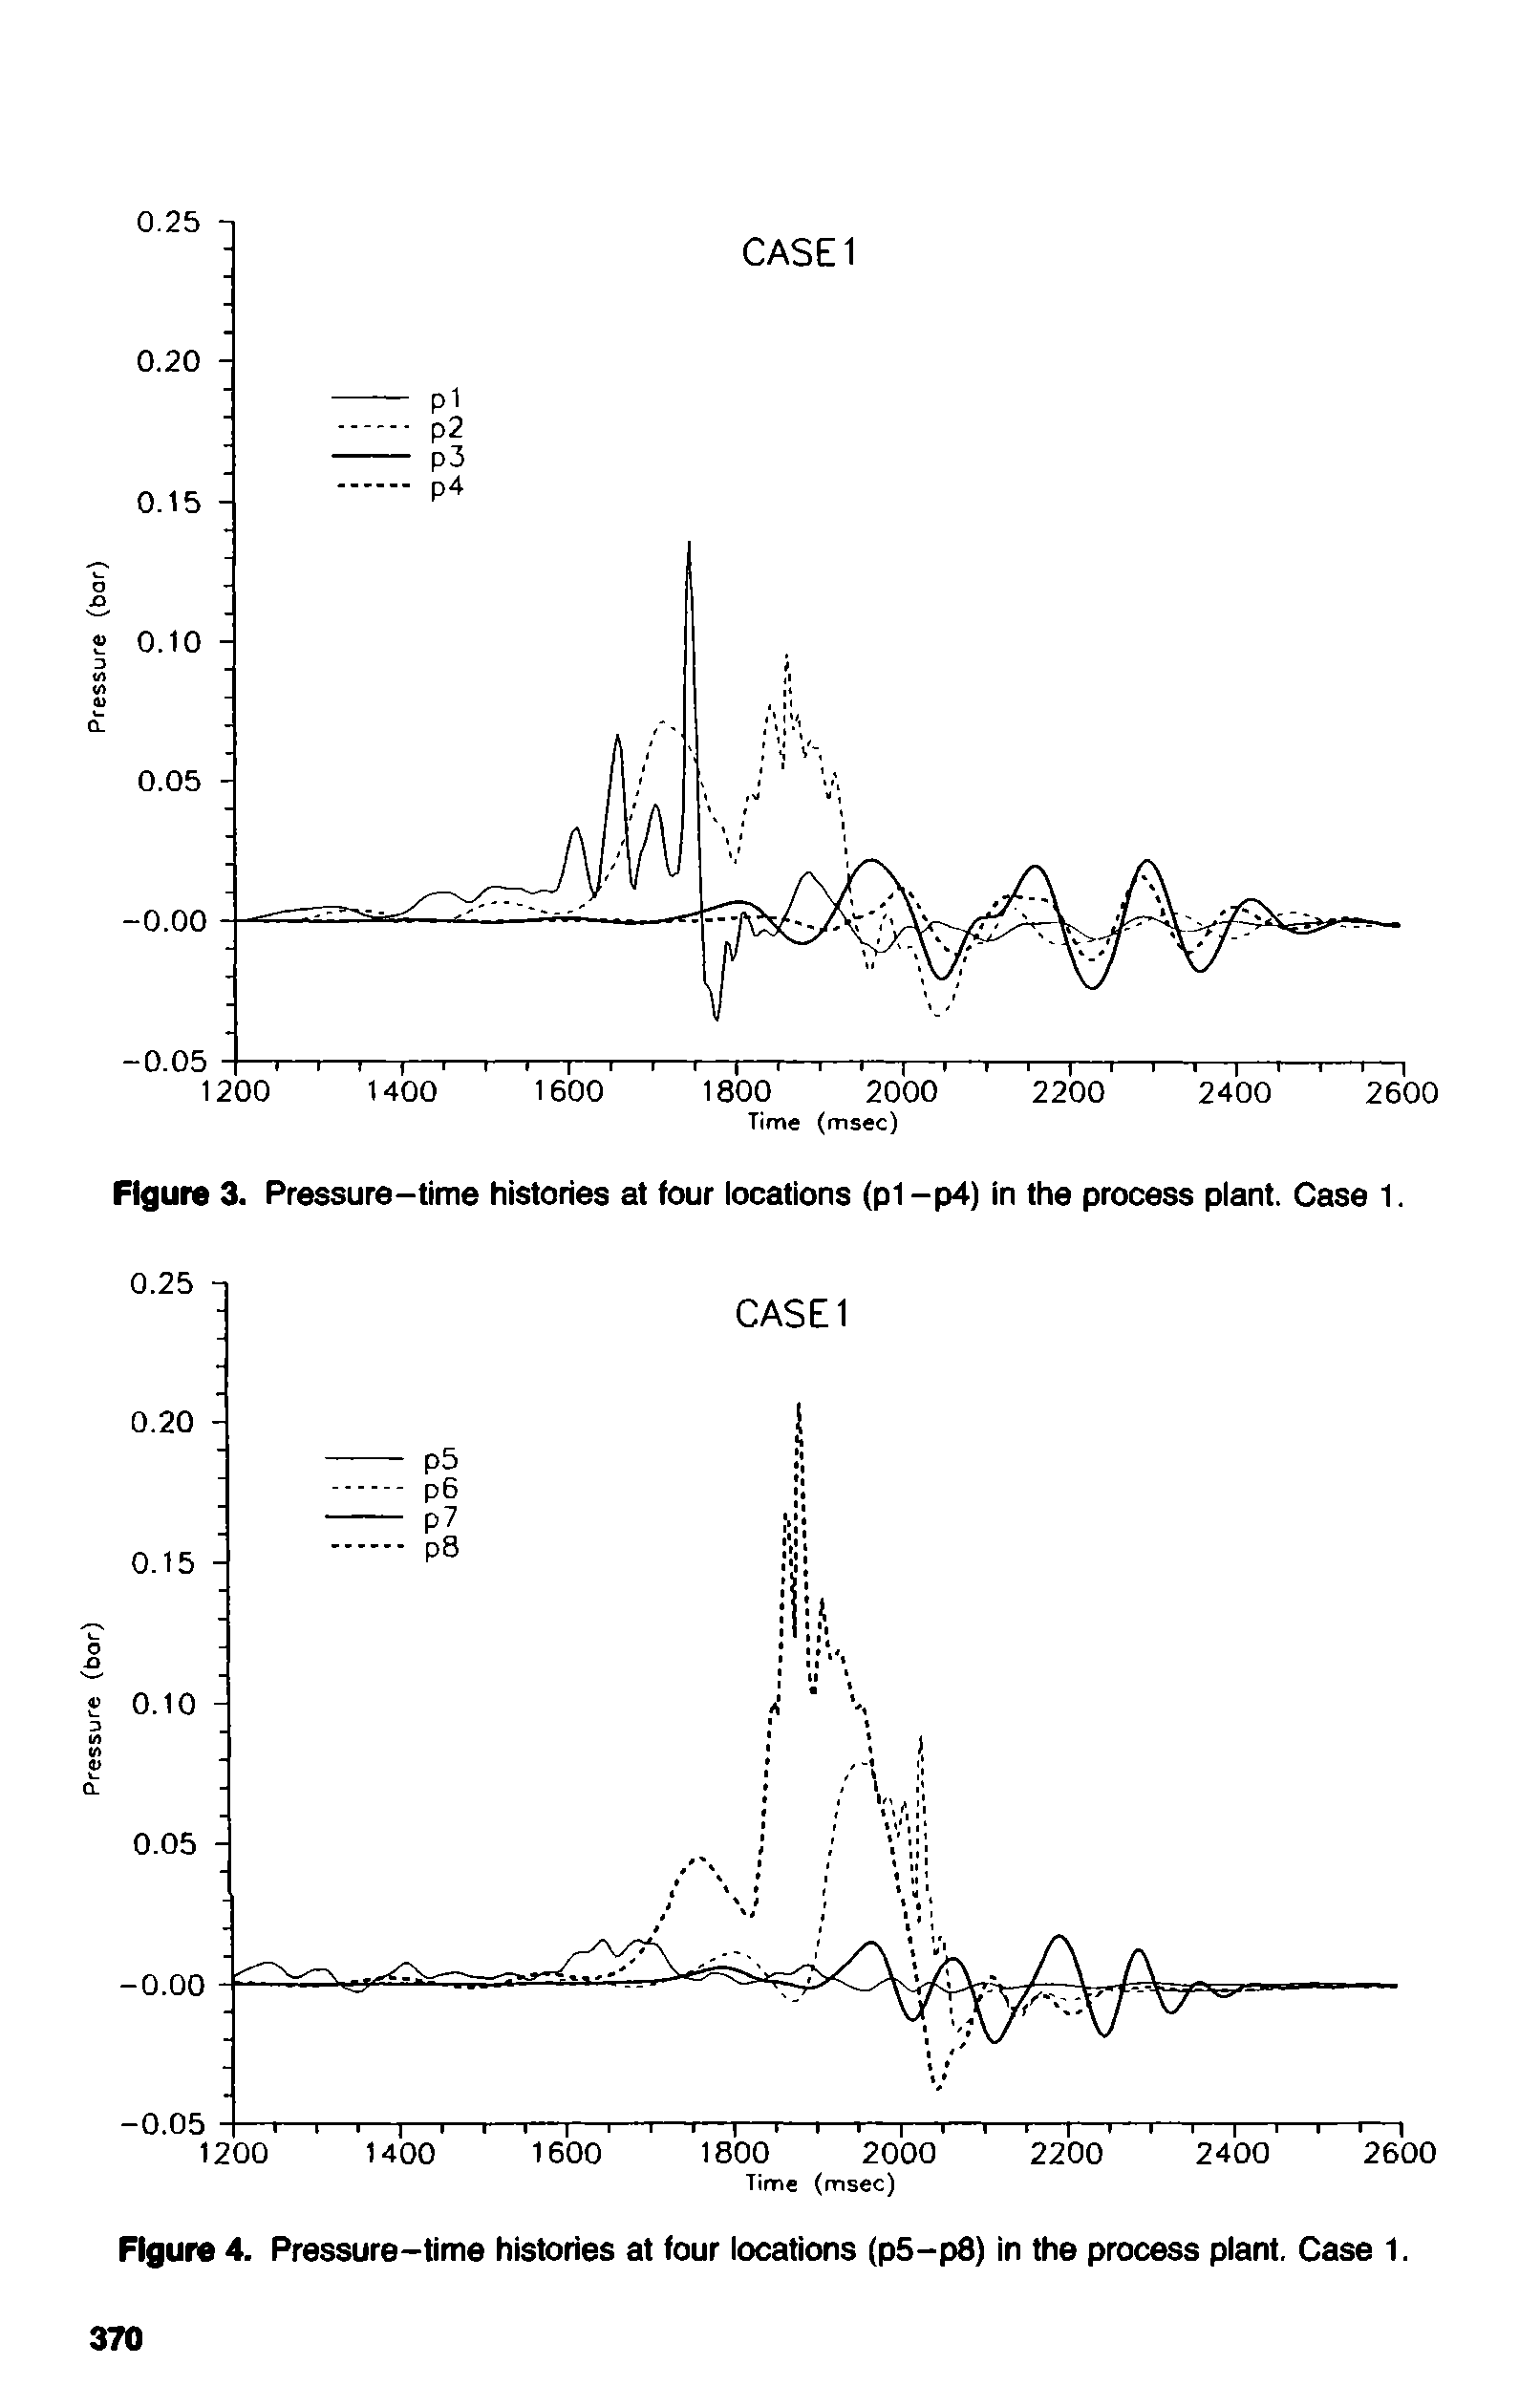 Figure 3. Pressure-time histories at four iocations (p1 -p4) in the process piant. Case 1.